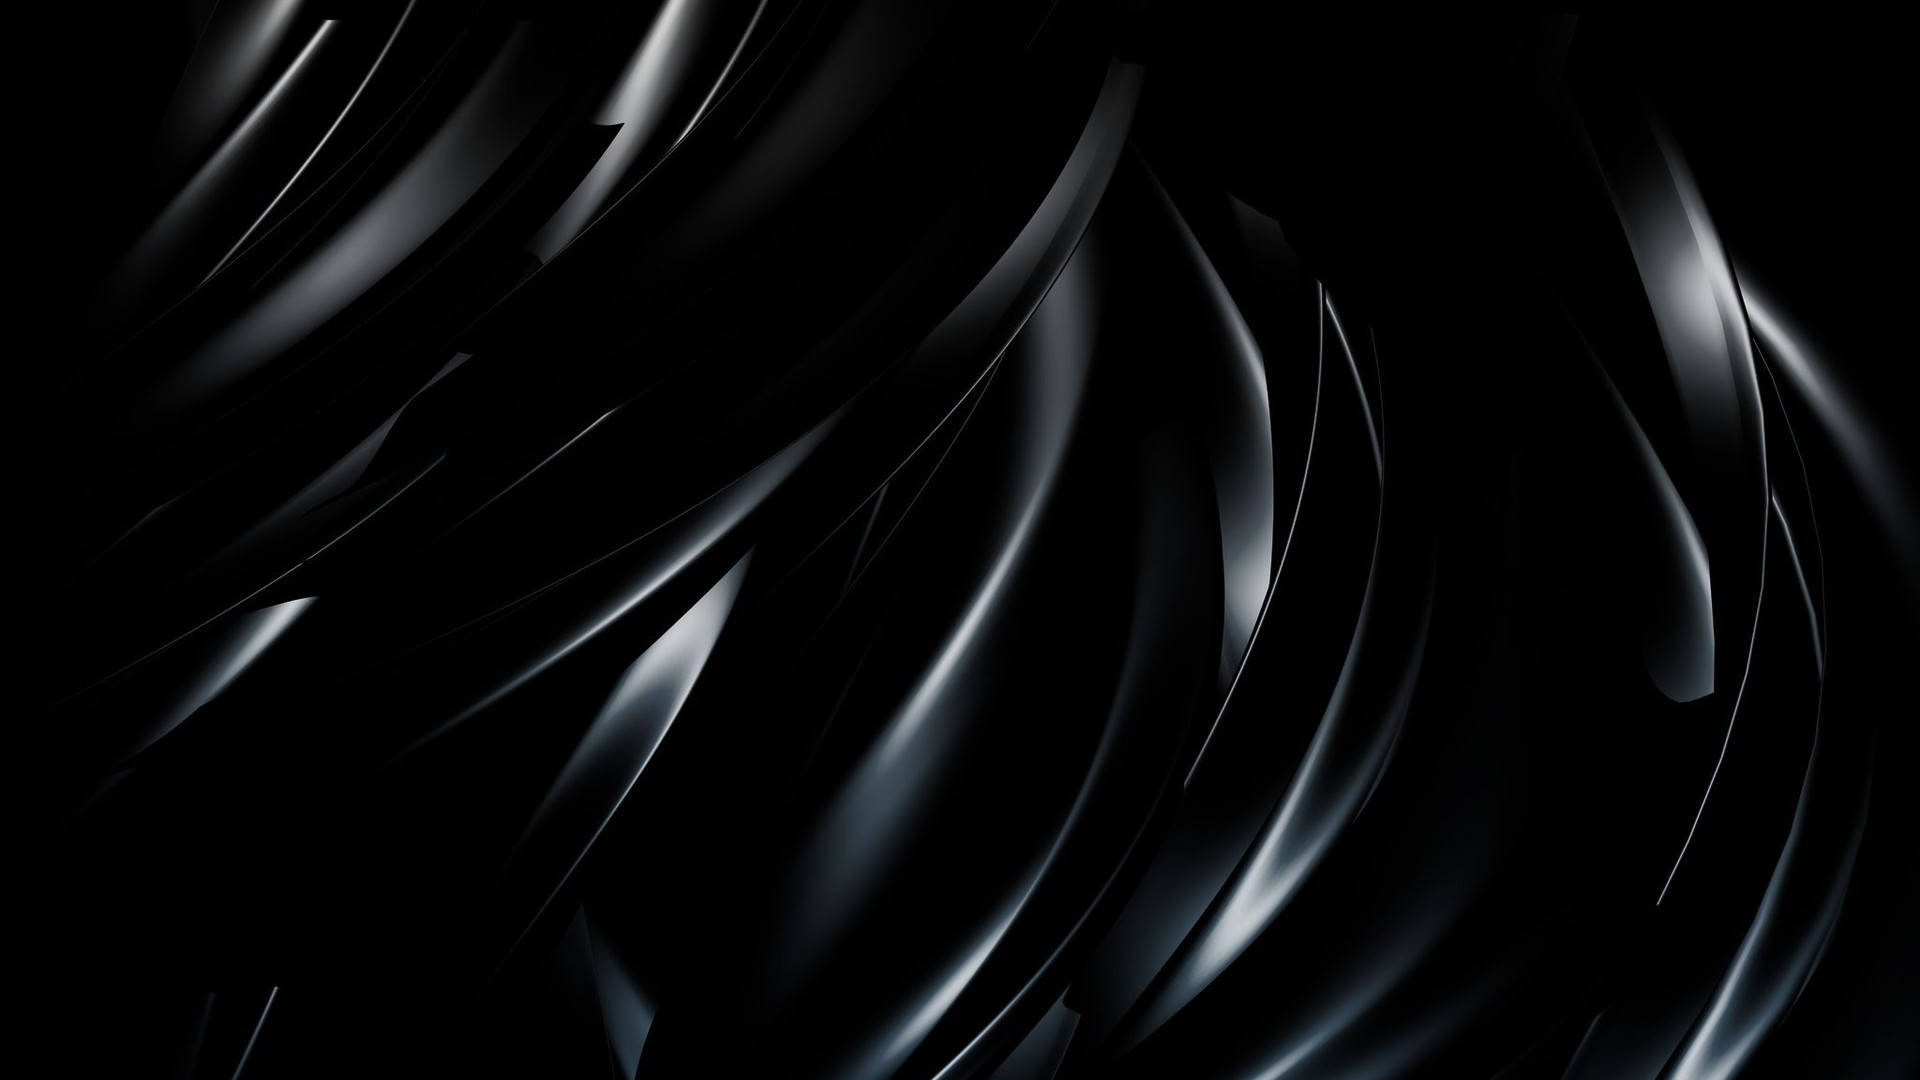 Free Dark Abstract Wallpaper Downloads, [200+] Dark Abstract Wallpapers for  FREE 